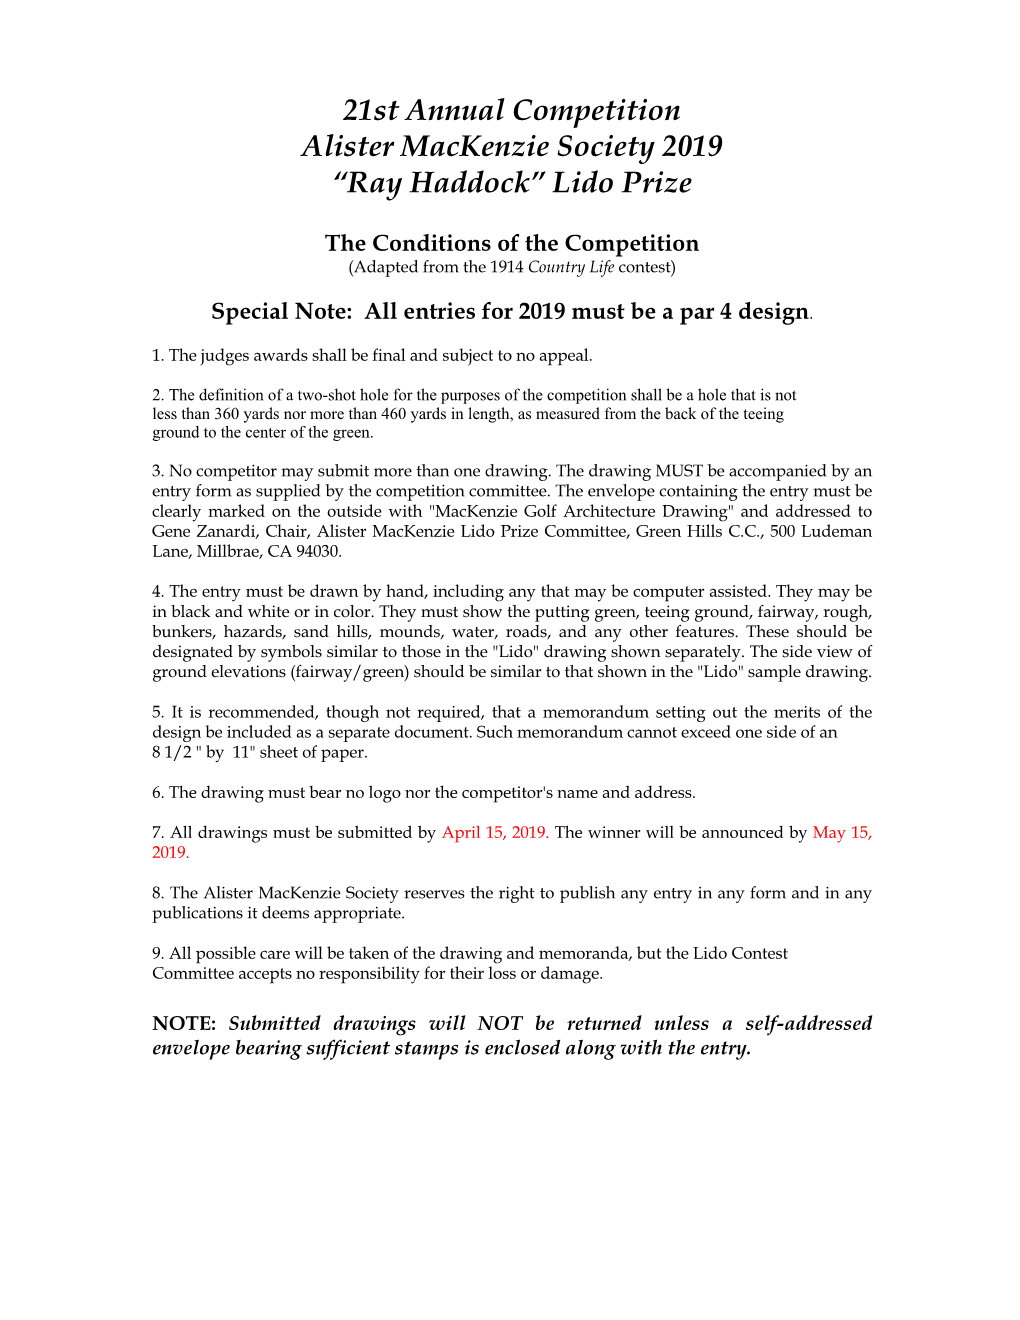 21St Annual Competition Alister Mackenzie Society 2019 “Ray Haddock” Lido Prize